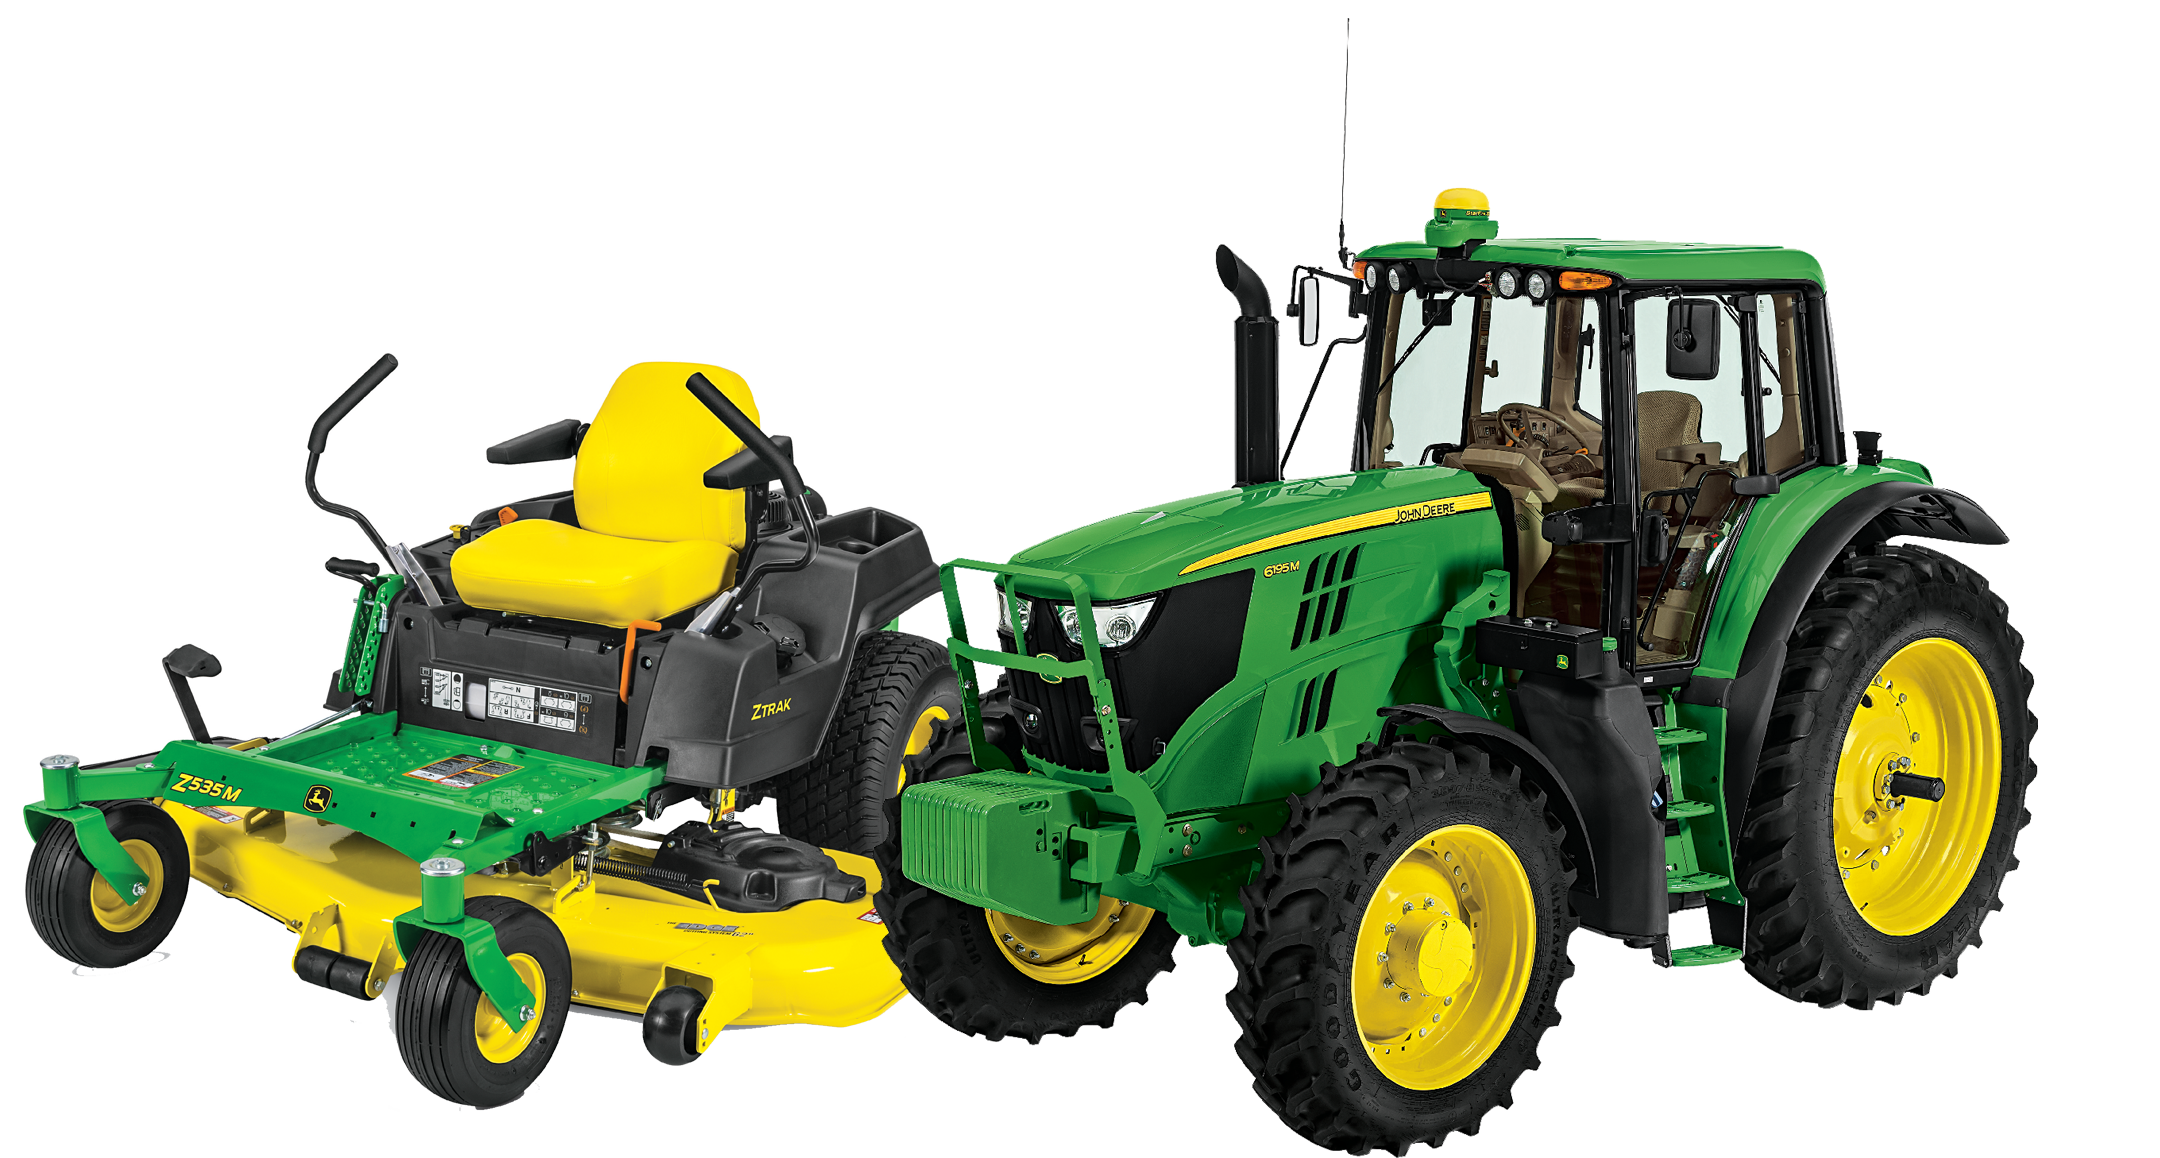 Shop new agricultural equipment in Flint Equipment